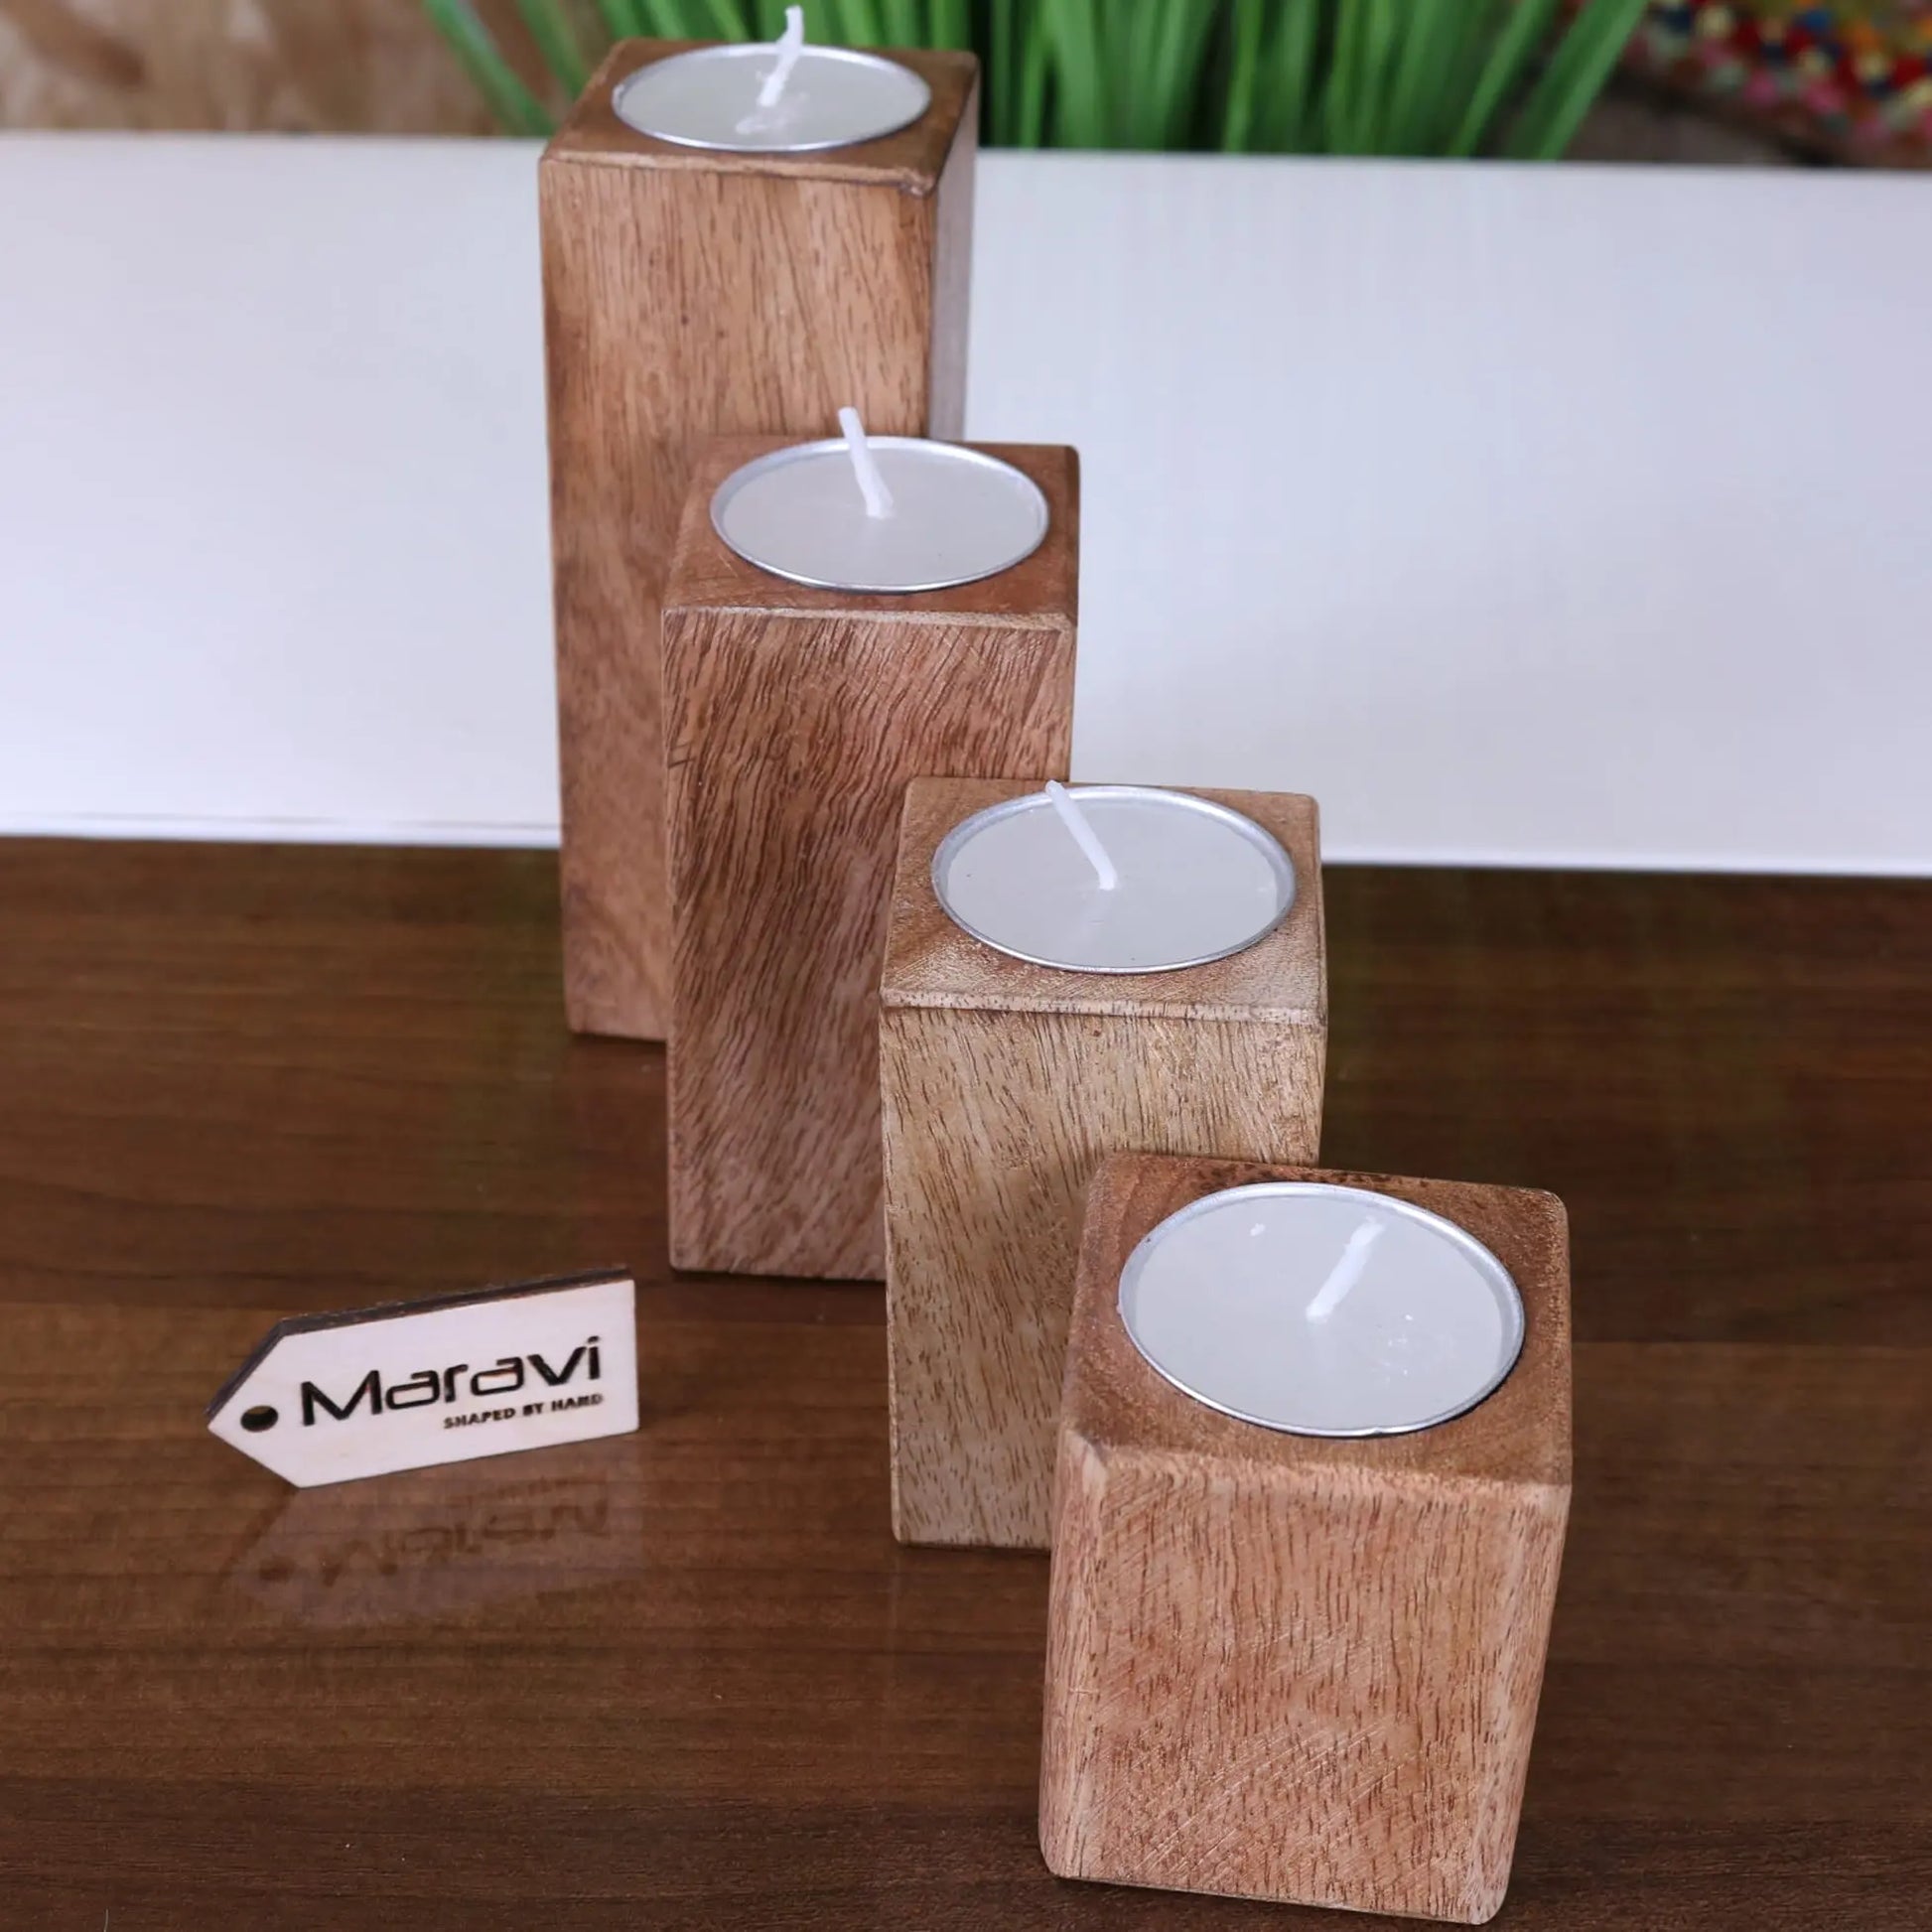 Bure Wooden Tea Light Holders Set of 4 - Front view staggered to show different heights